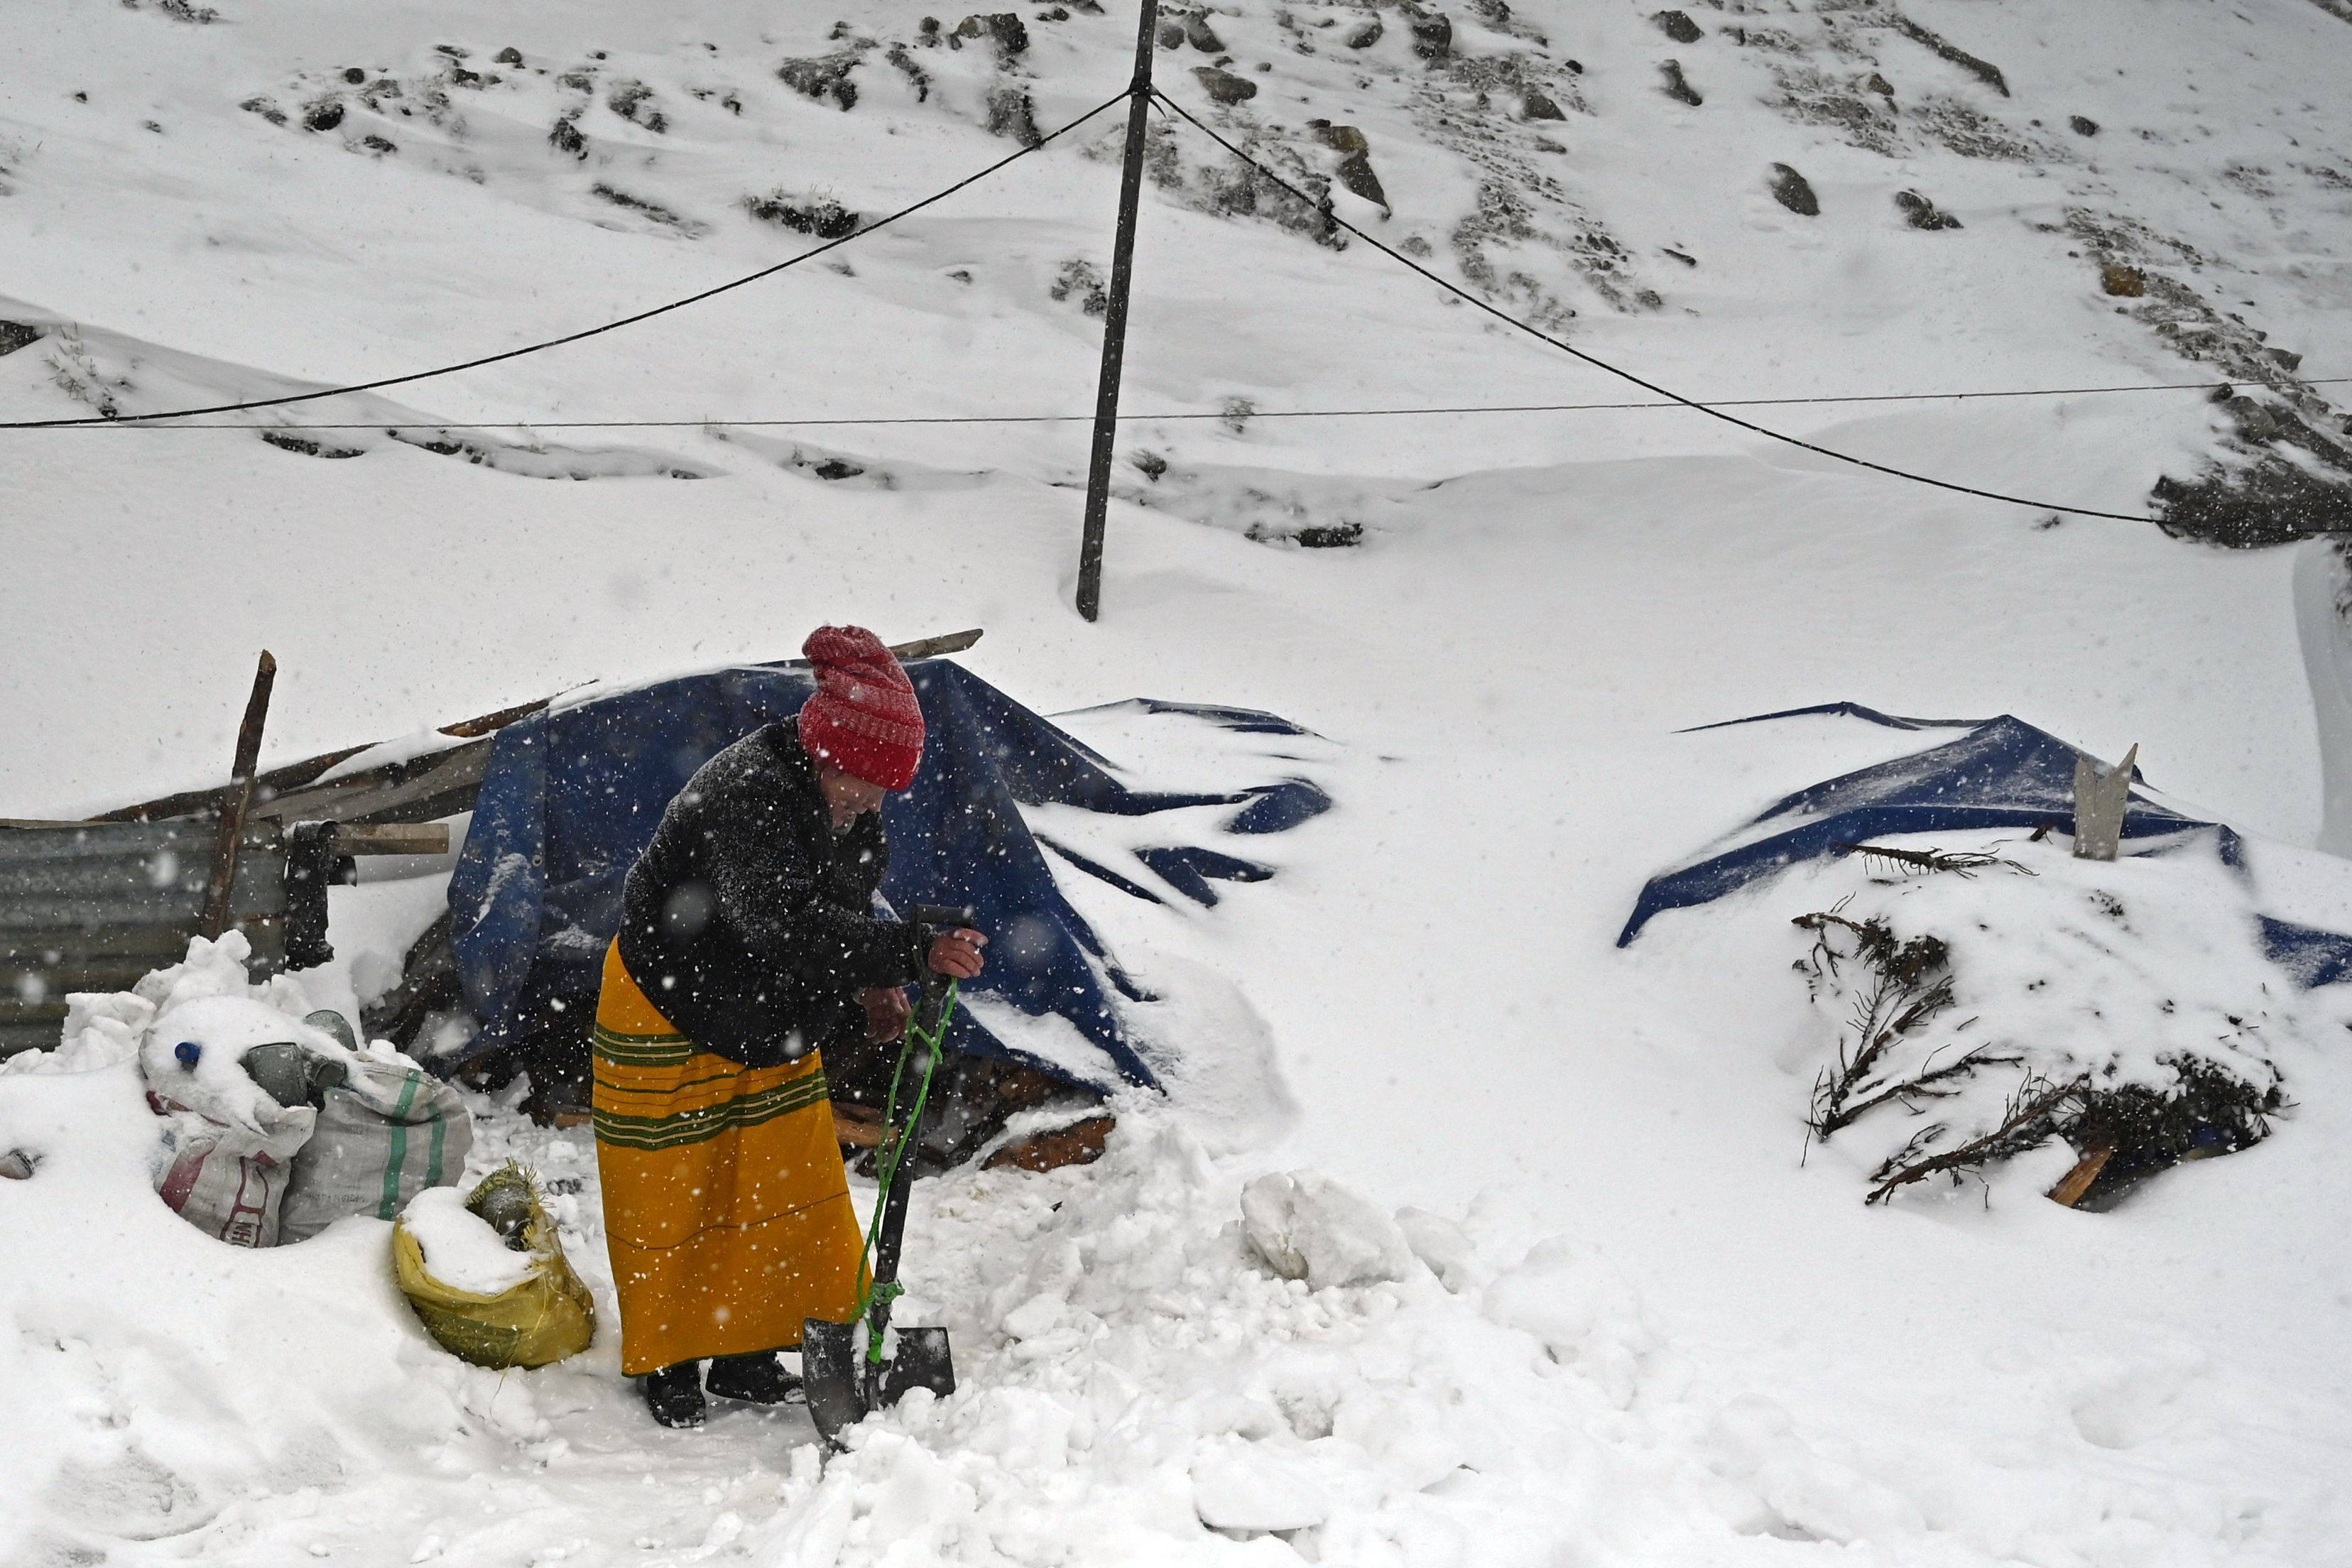 A woman clears the snow in front of her home at the Sela Pass in India’s Arunachal Pradesh state. Photo: AFP